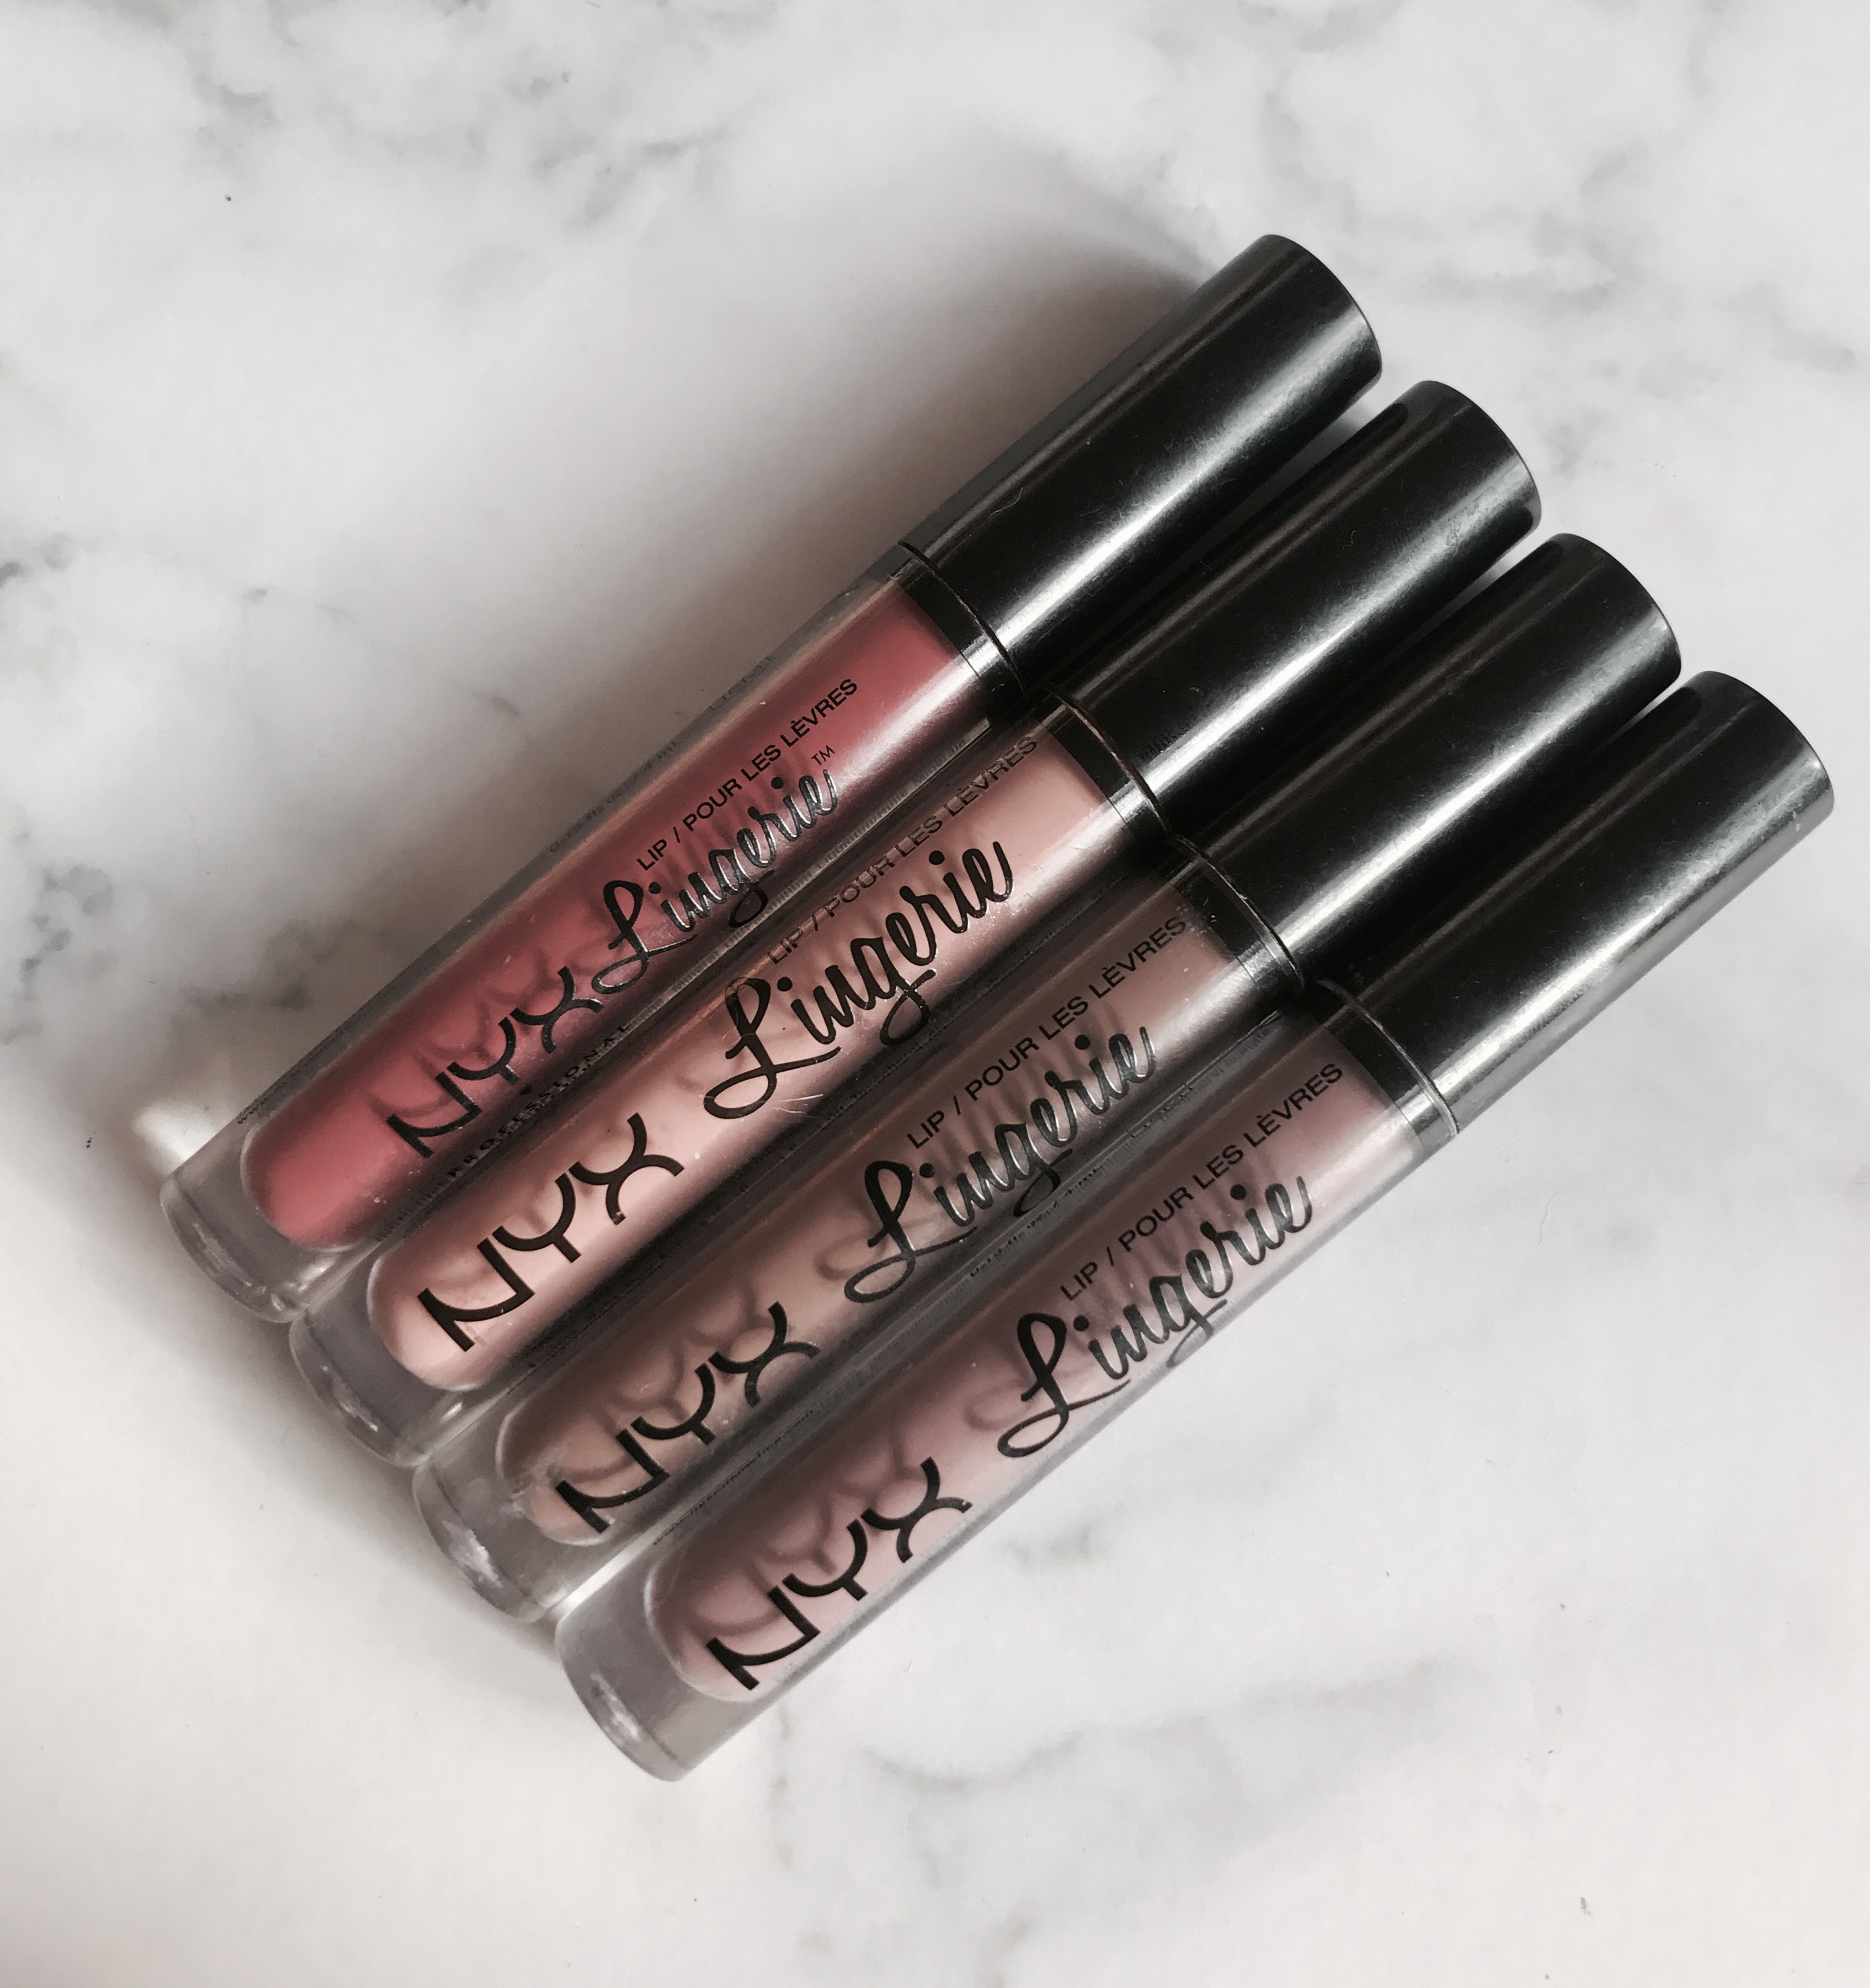 I'm looking for a non-liquid lipstick dupe for NYX lip lingerie 12